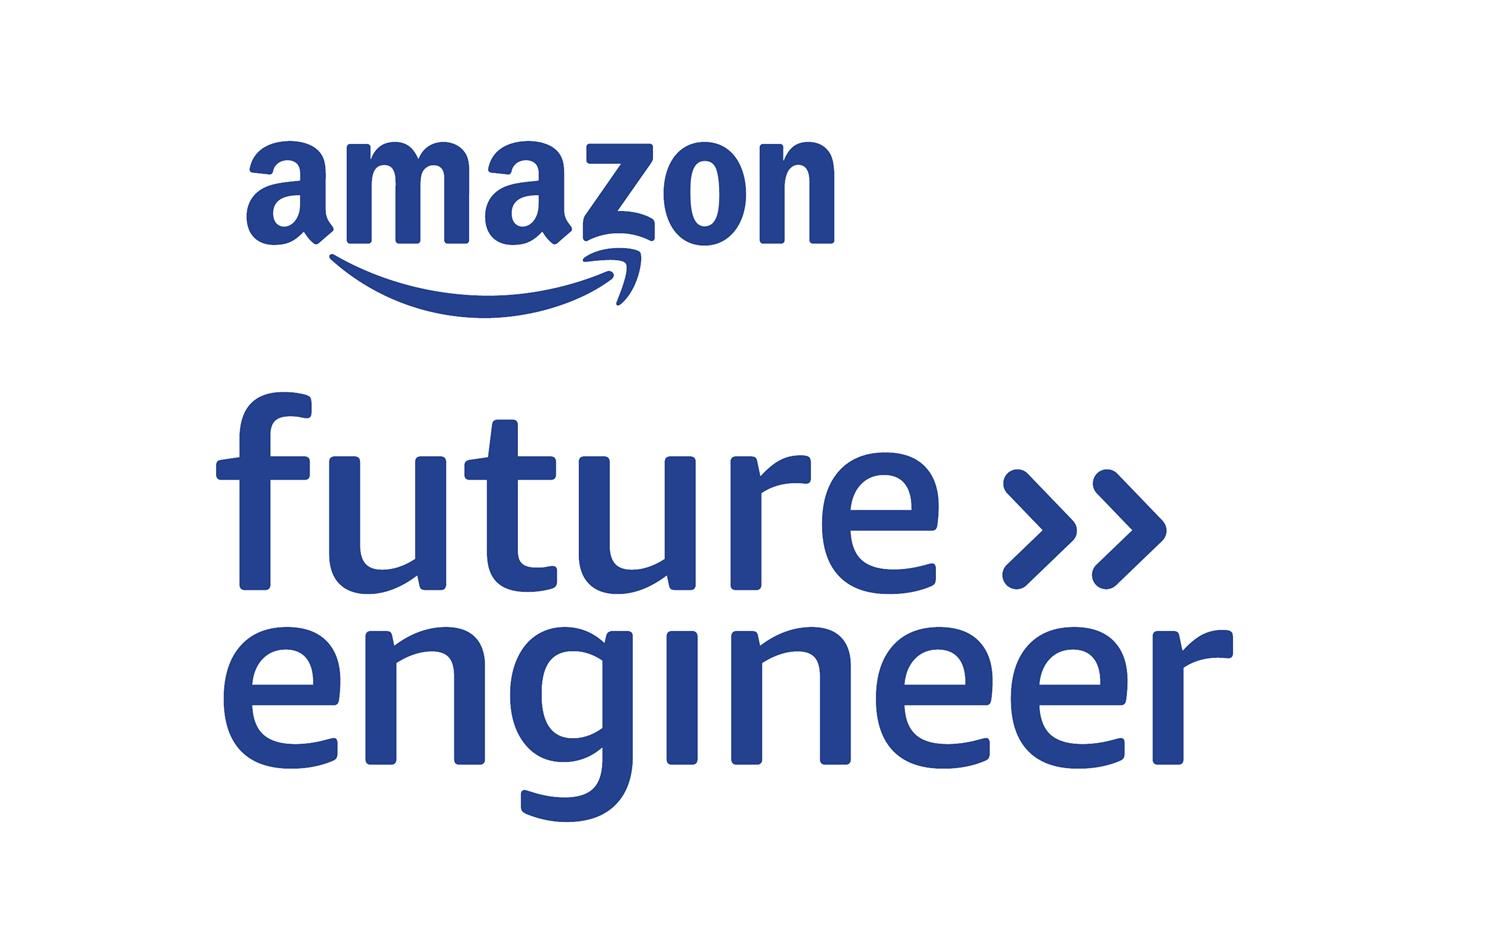  Amazon  Future Engineer logo. Blue lettering with arrows pointing toward Future Engineer words